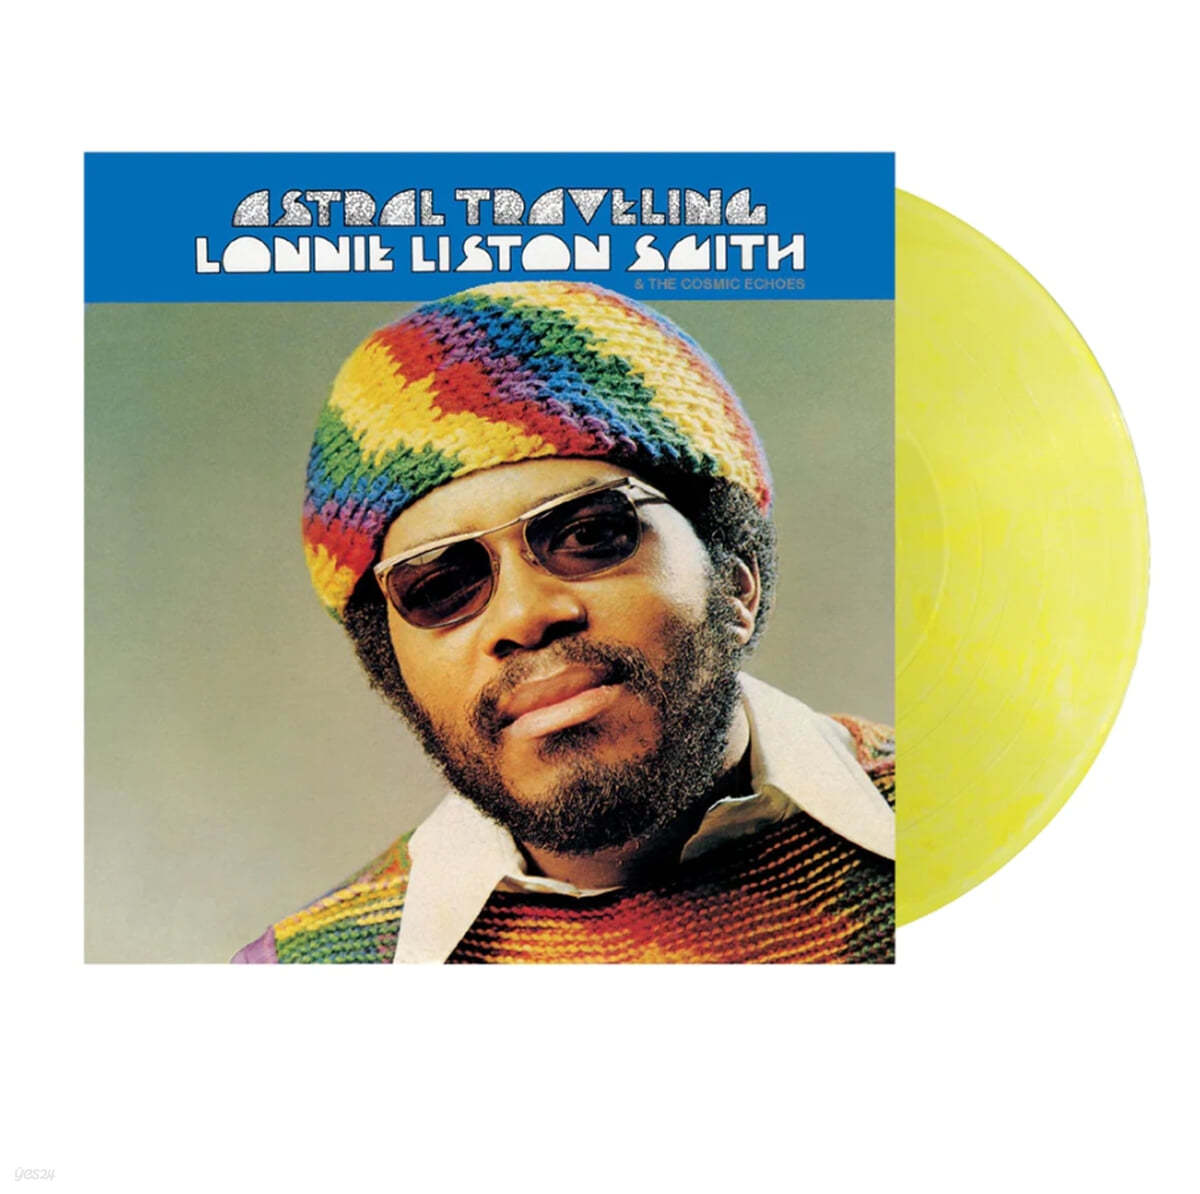 Lonnie Liston-Smith &amp; The Cosmic Echoes (로니 리스턴 스미스 앤 더 코스믹 에코스) - Astral Traveling [투명 옐로우 컬러 LP]